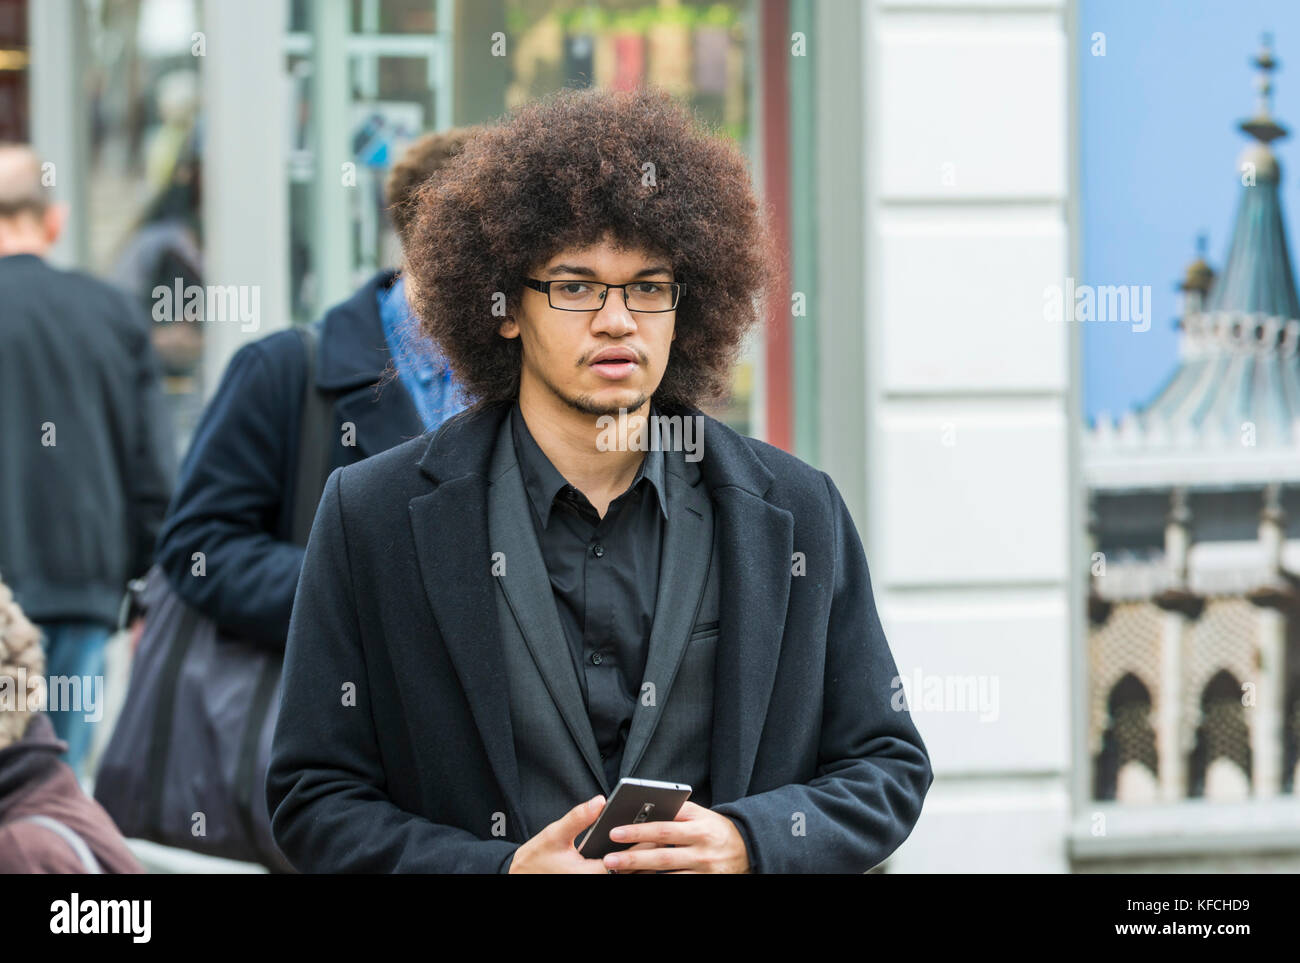 Young man with an afro hairstyle walking in a city in Brighton, East Sussex, England, UK. Stock Photo